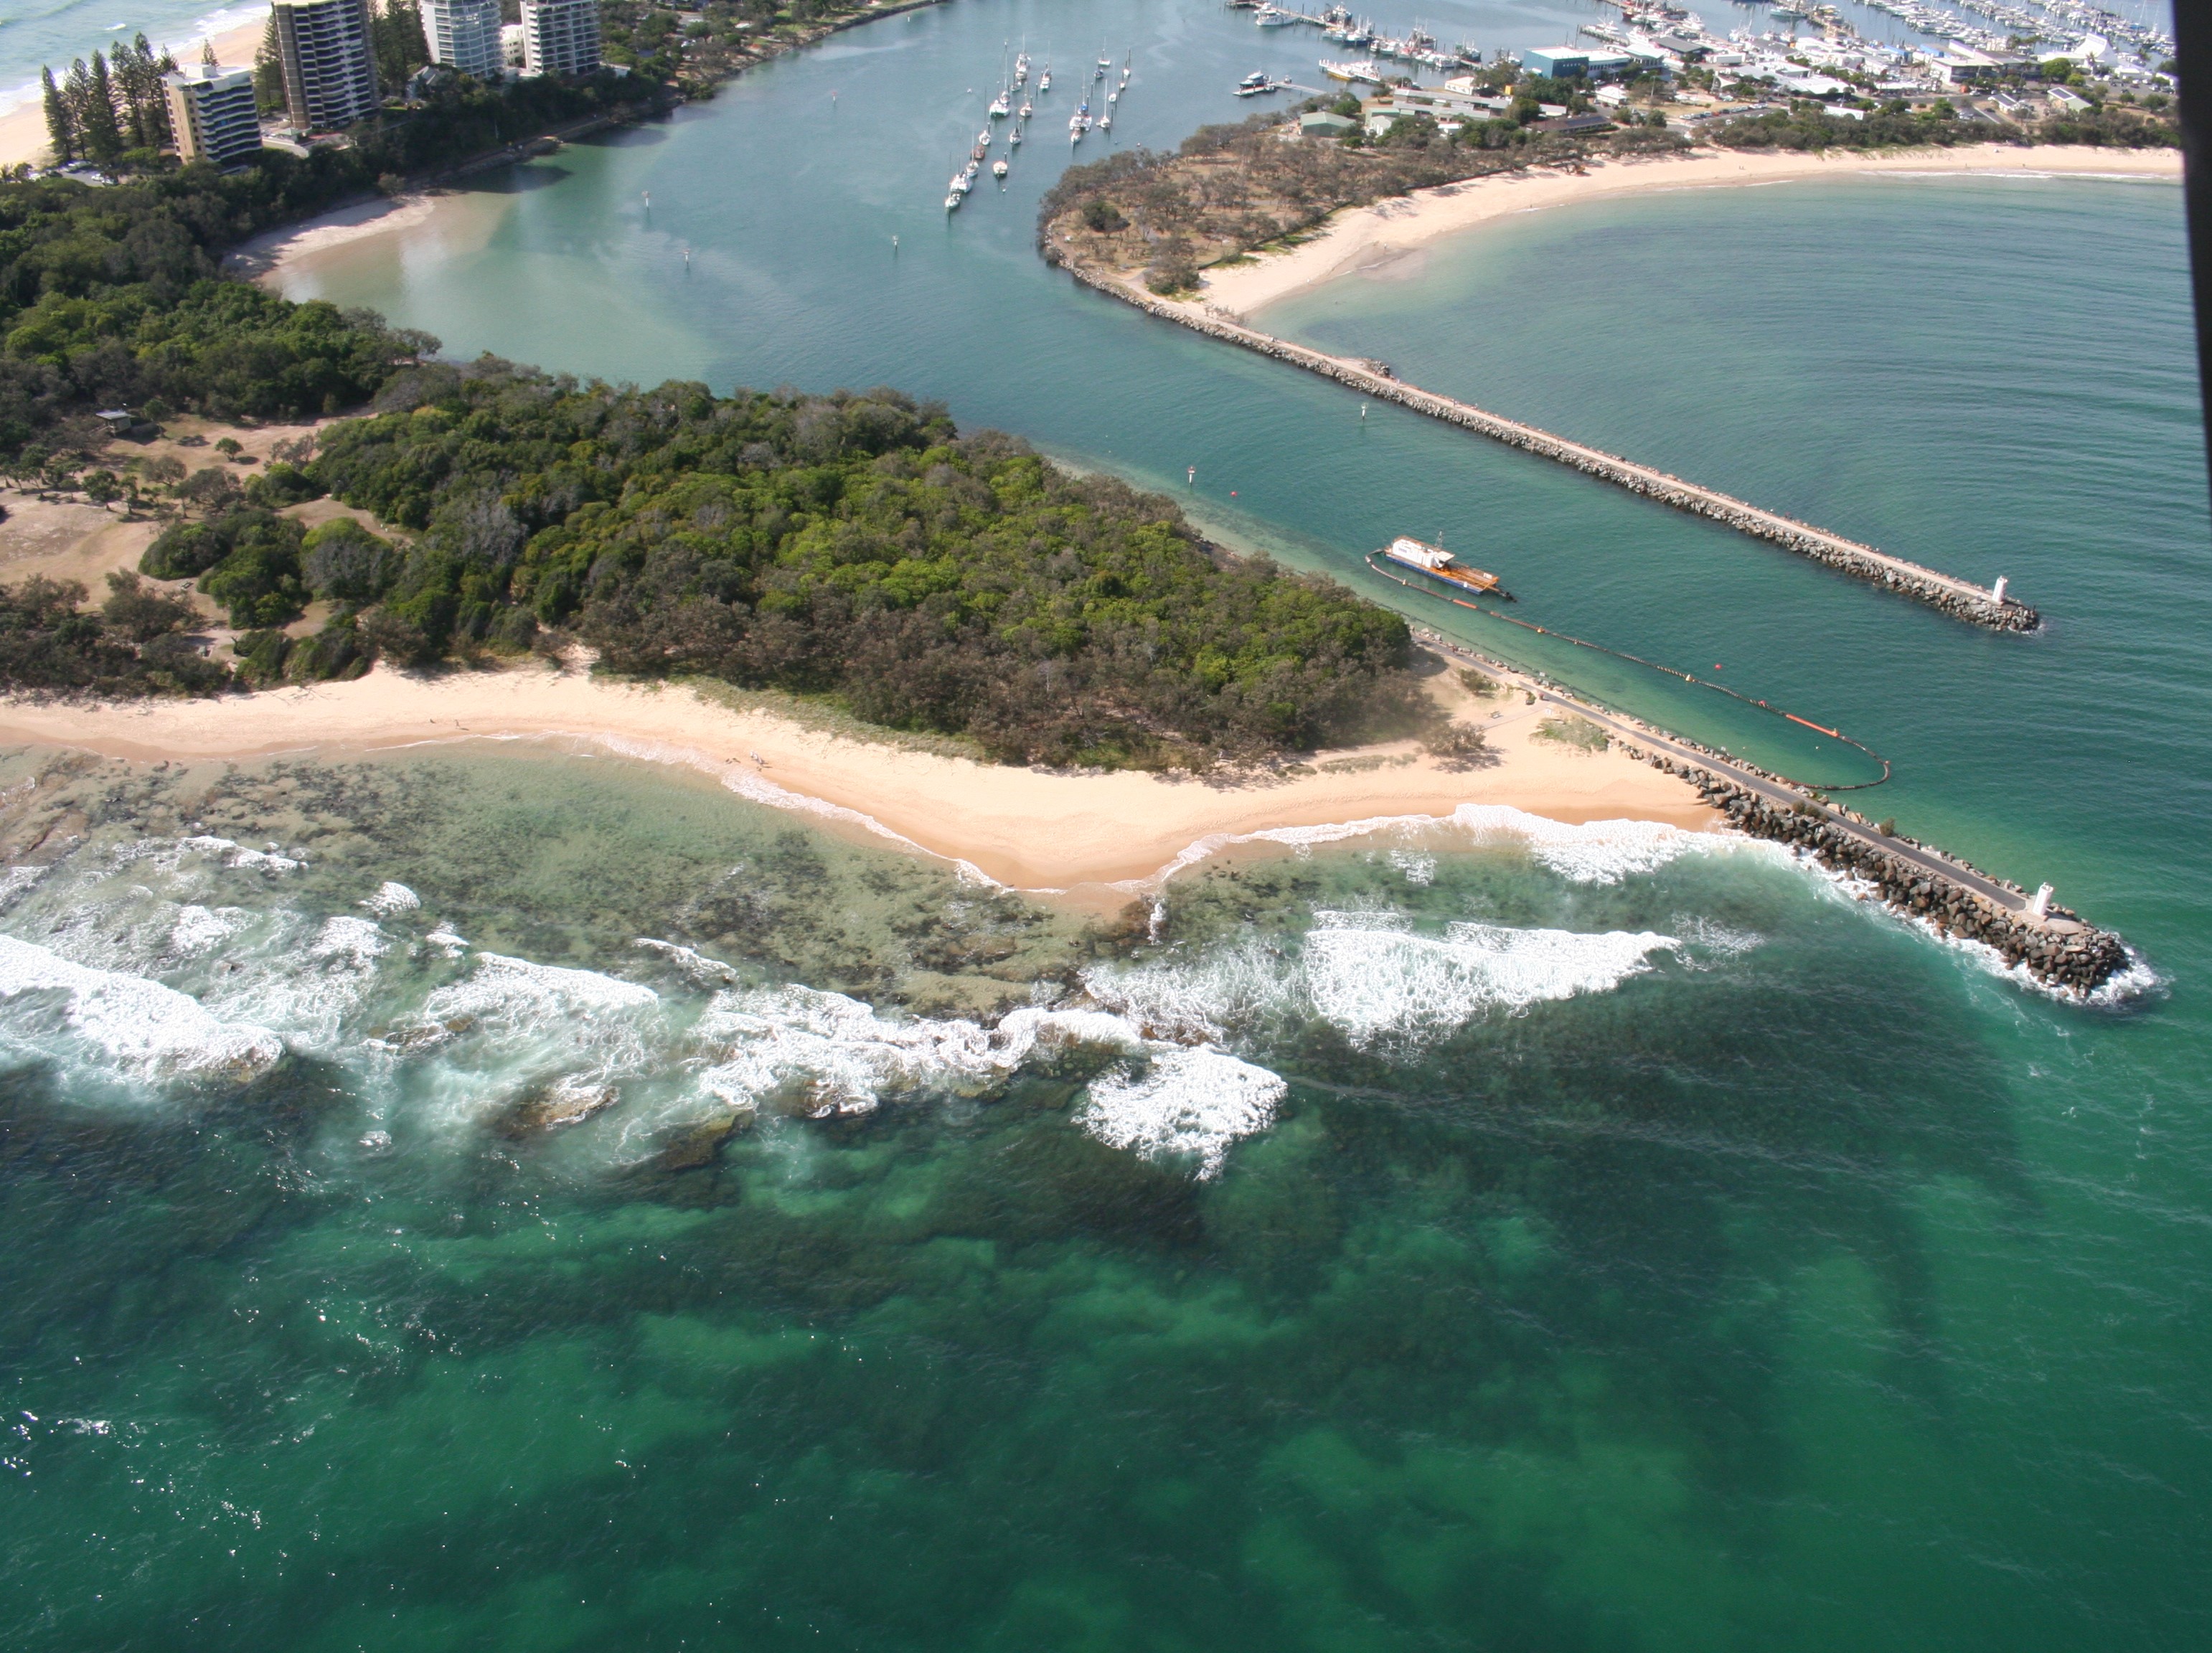 Aerial image of the dredge in the Mooloolaba channel